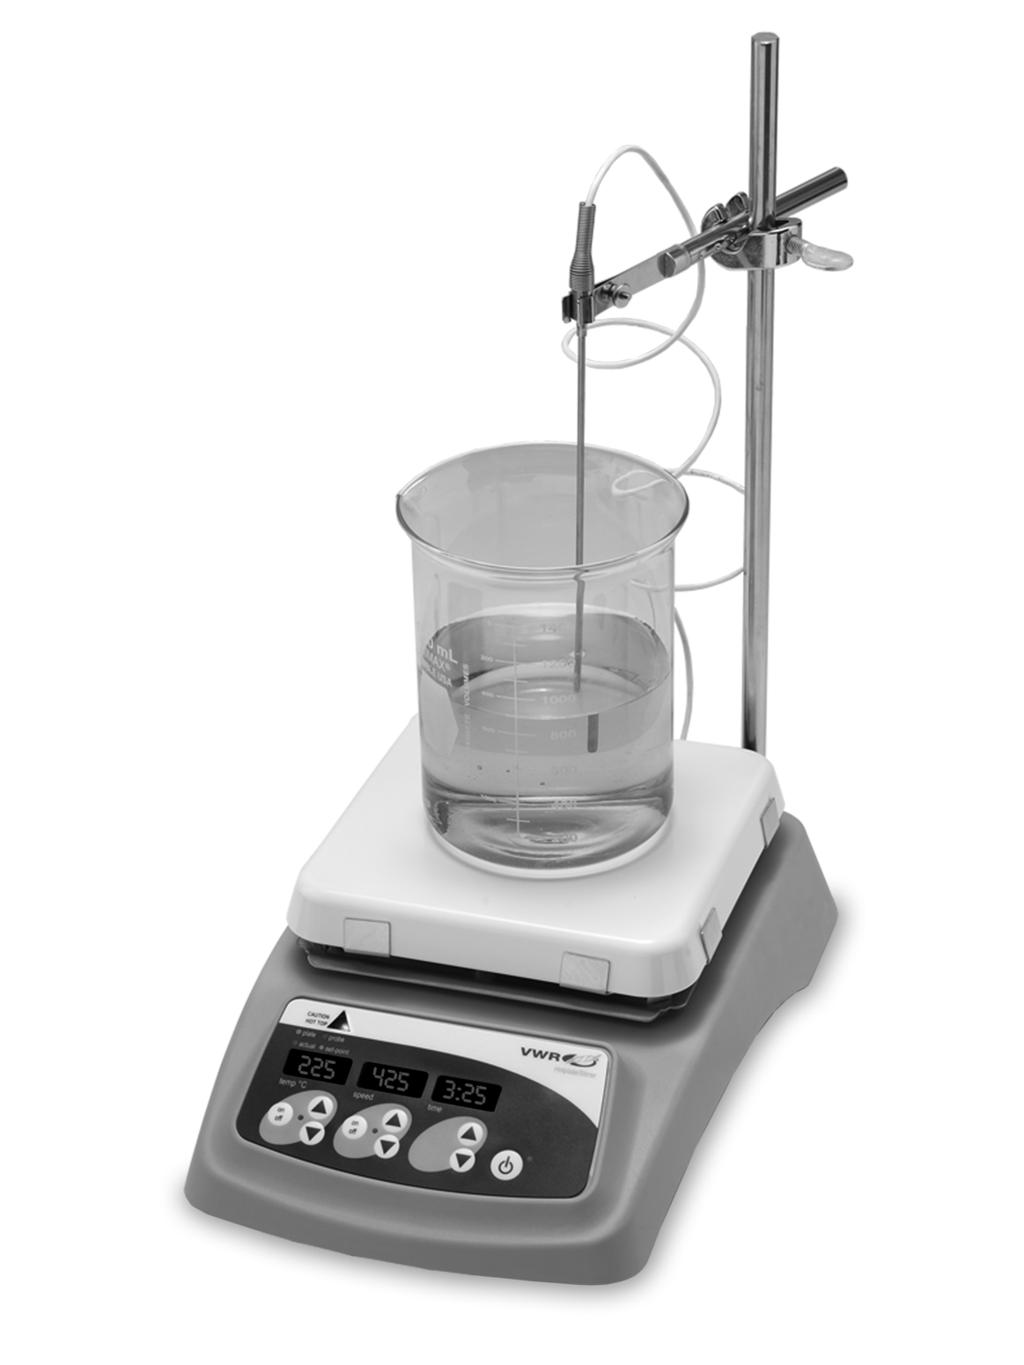 PROFESSIONAL SERIES 7 X 7 VWR Professional Series 7 x 7, ceramic Hotplate-Stirrer with Probe Kit and glassware* 7 X 7 HOTPLATE/STIRRER/HOTPLATE-STIRRER SPECIFICATIONS Dimensions (L x W x H): Top